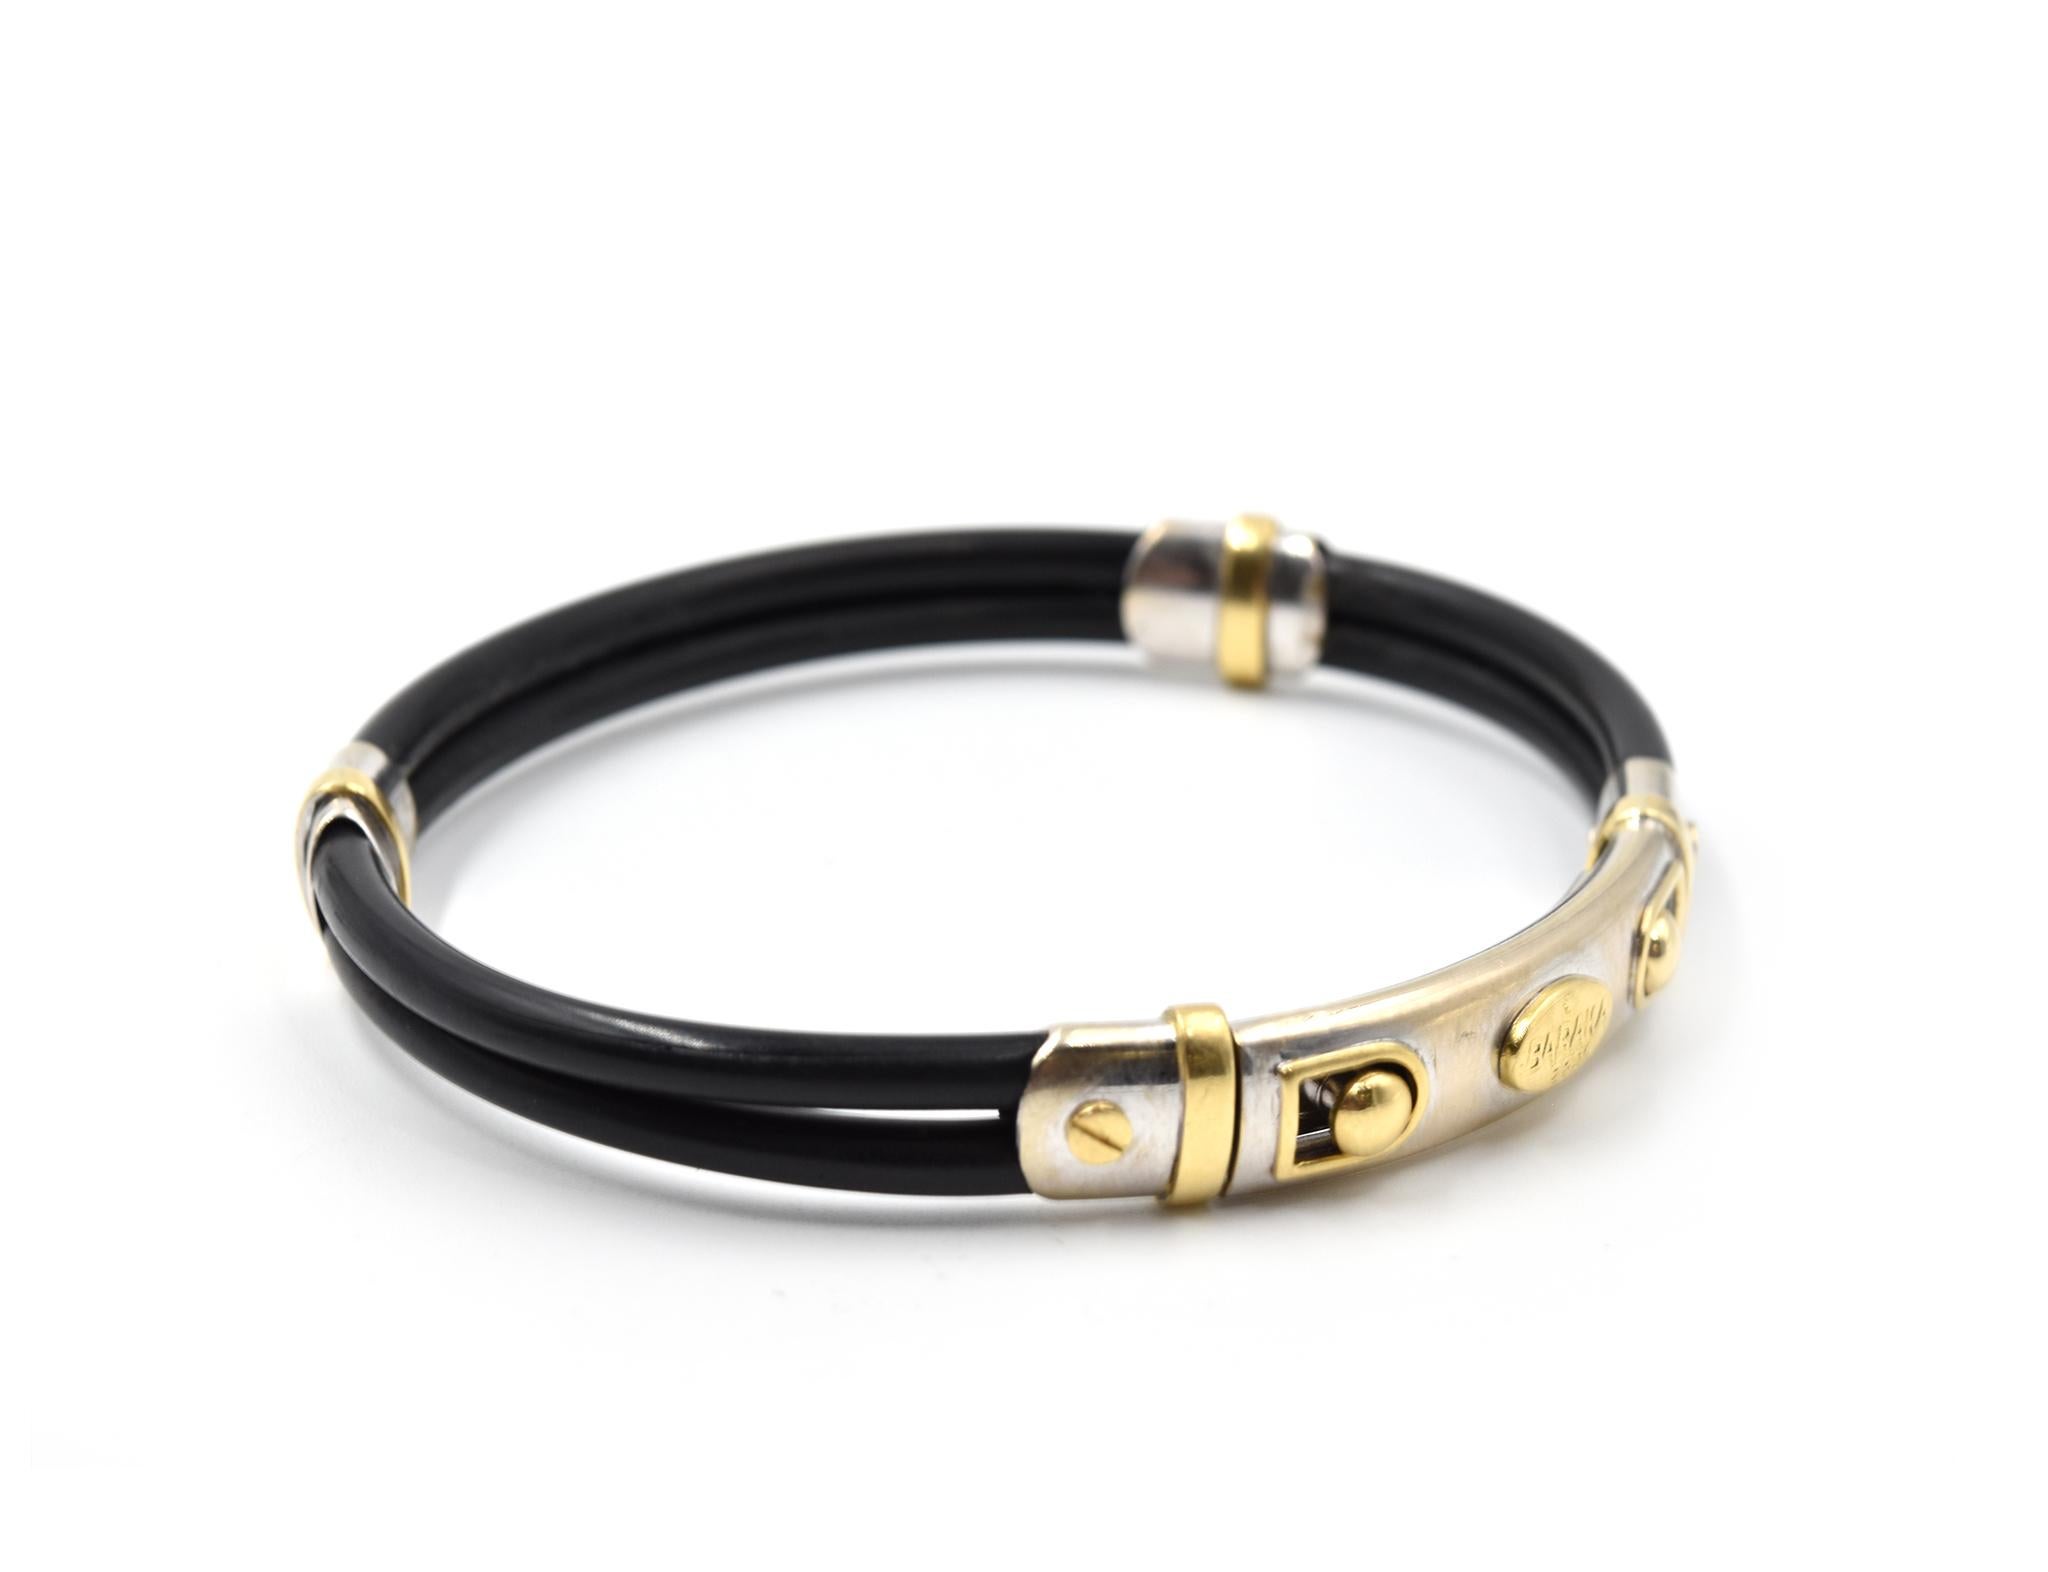 Designer: Baraka
Material: 18k two-tone gold and rubber
Size: bracelet will fit 8-inch wrist
Dimensions: bracelet is 8.9mm wide
Weight: 19.64 grams
